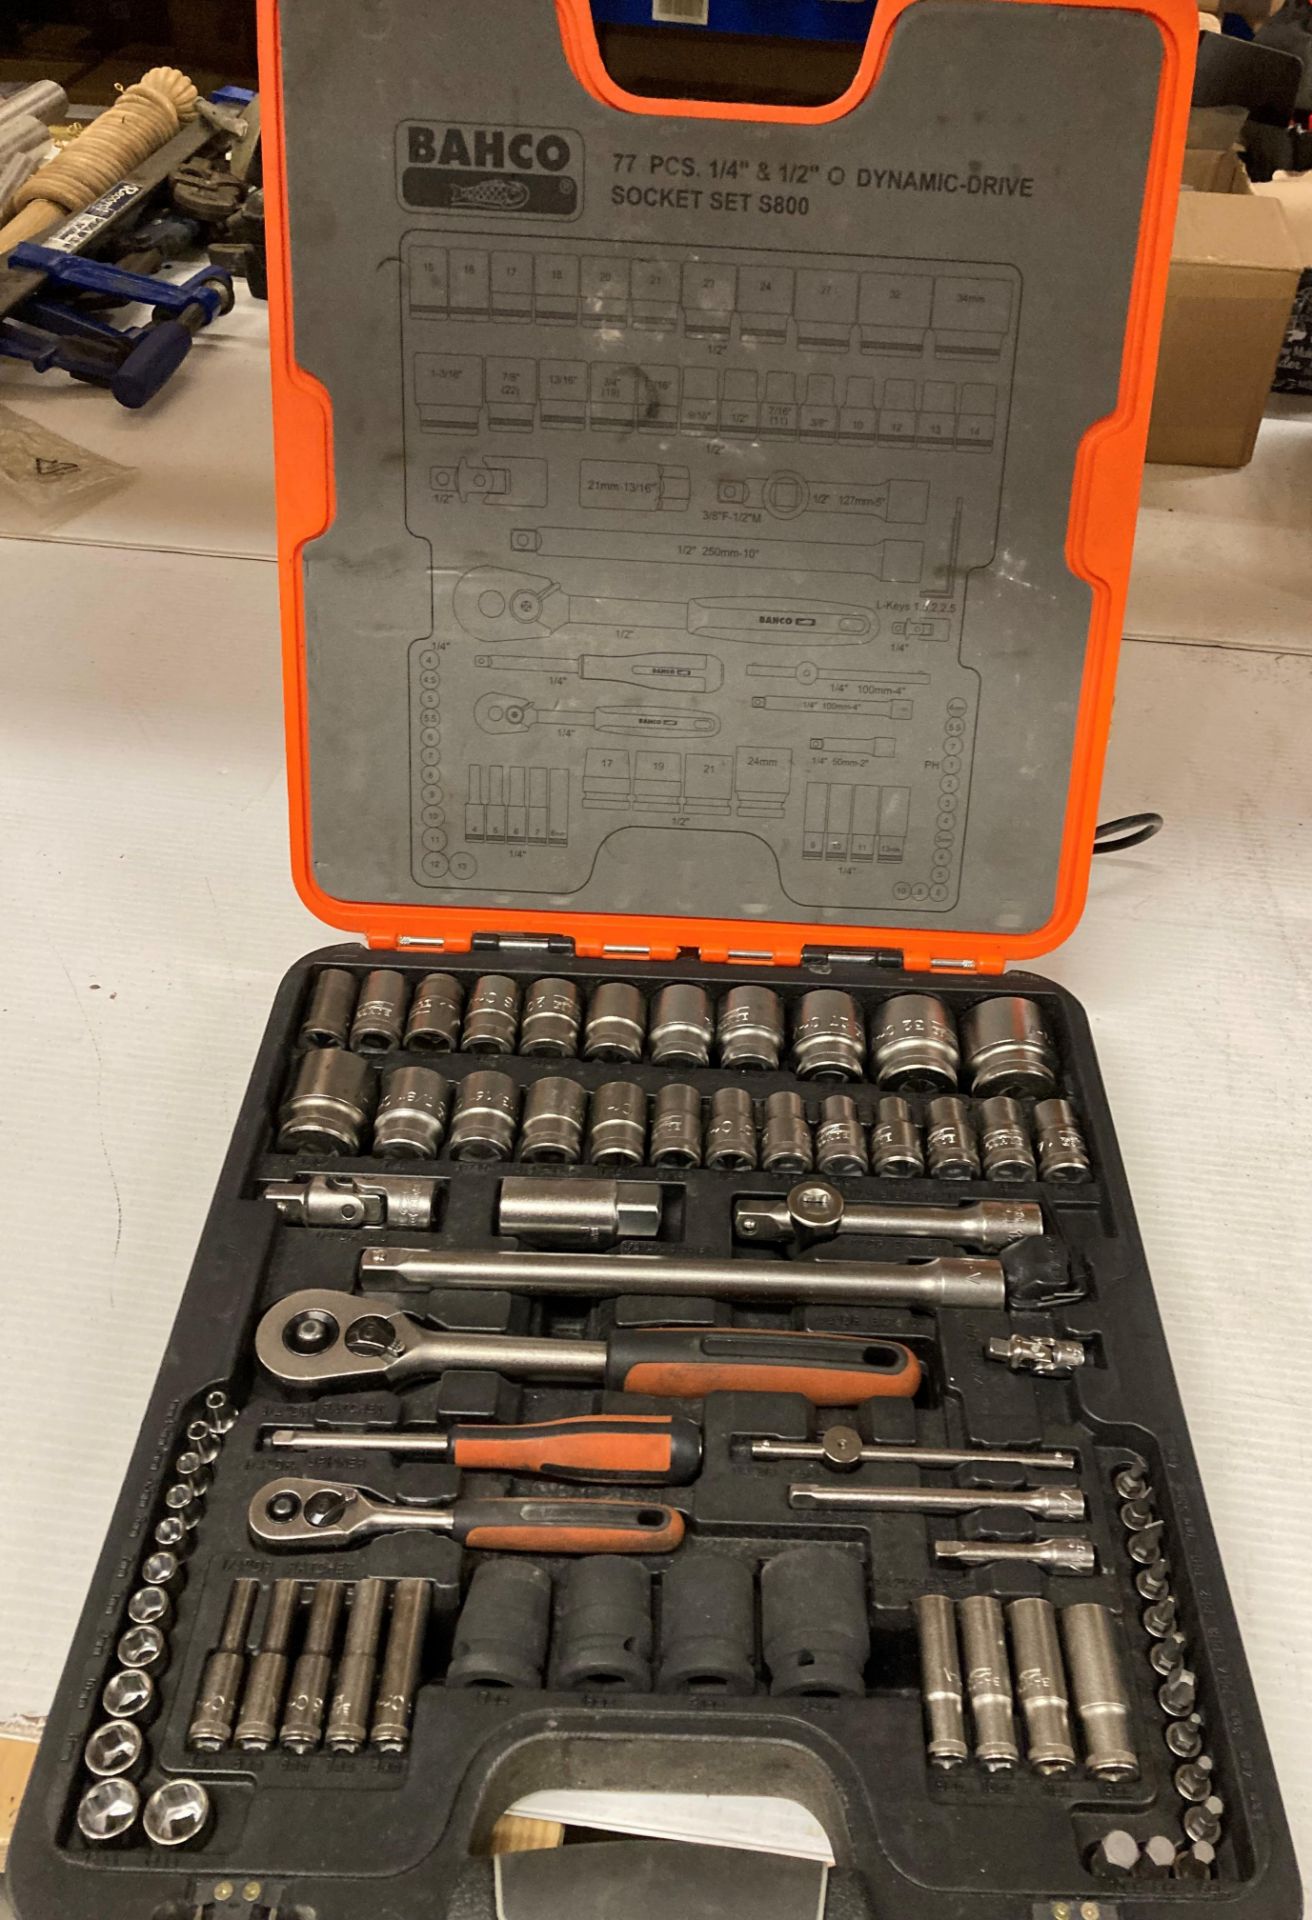 Bahco 77 piece 1/4 inch and 1/2 inch dynamic drive S800 socket set in case (Saleroom location: